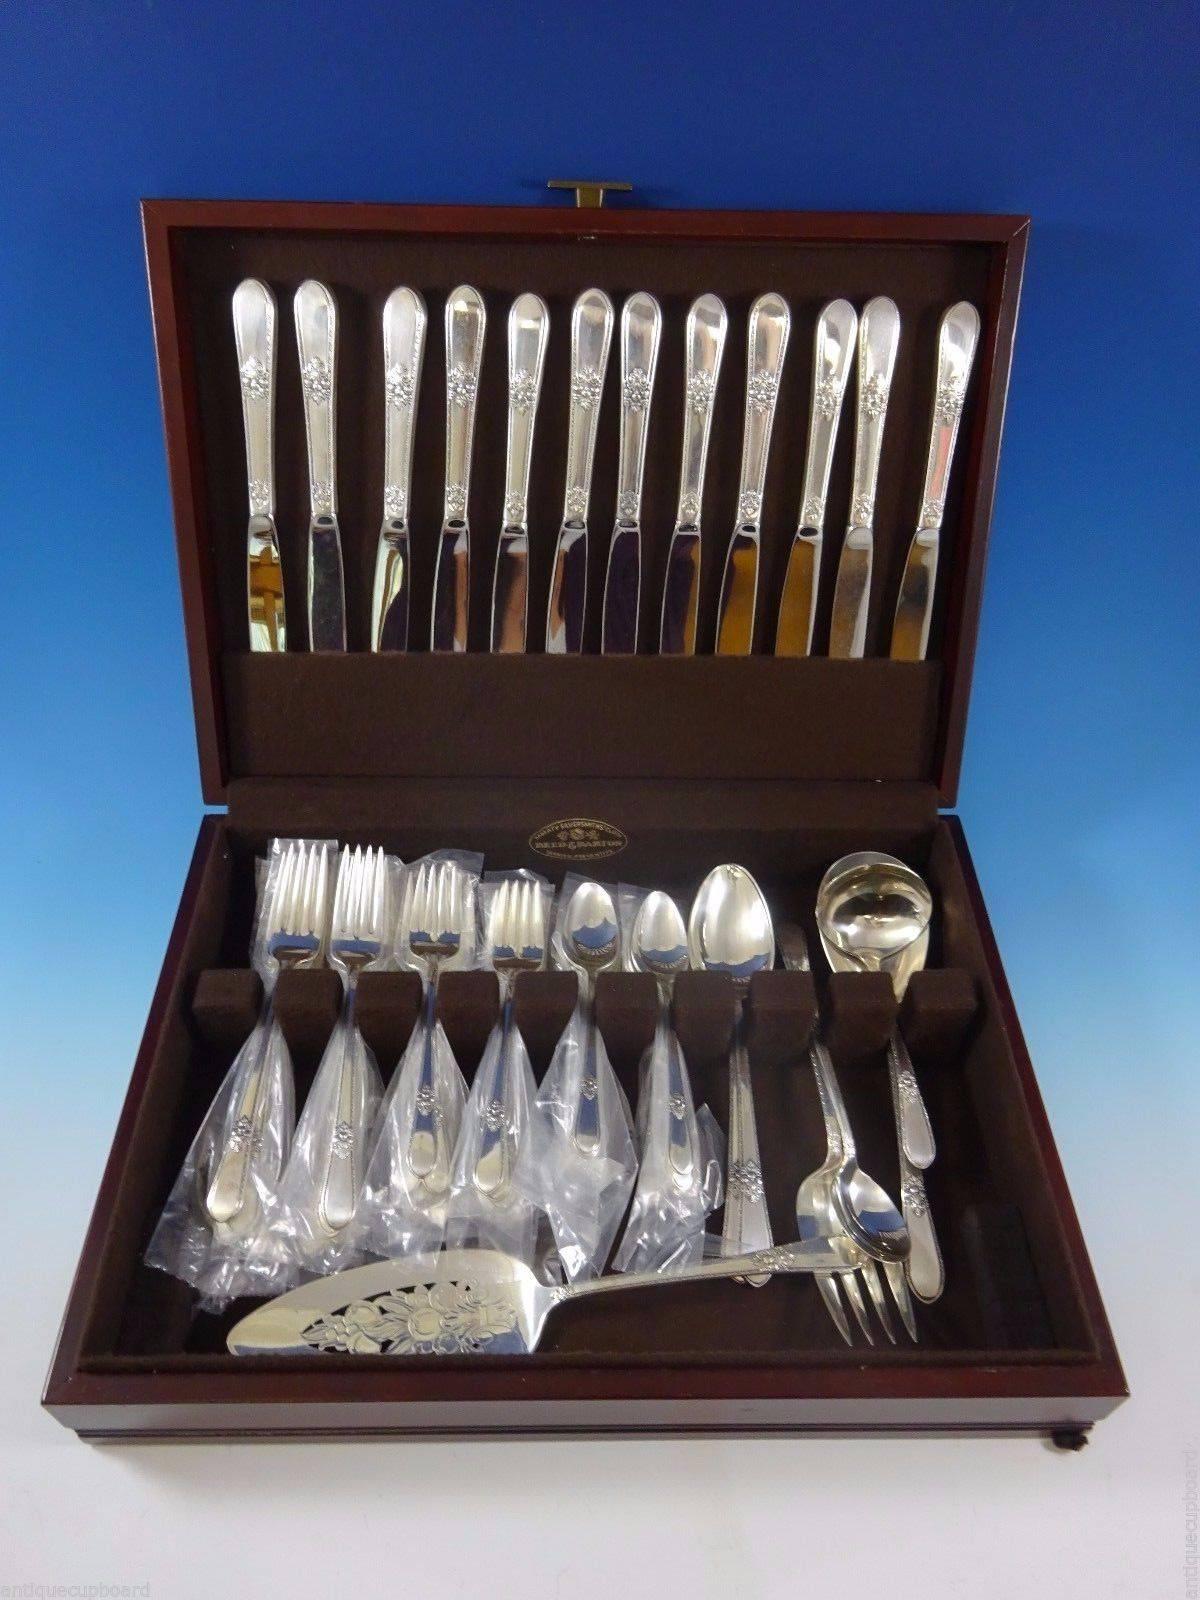 12 dinner knives 9 3/8", 12 dinner forks 7 5/8", 12 salad forks 6 3/4", 12 teaspoons 6 1/8", one gravy ladle 6", two serving spoon 8 1/2", one cold meat fork 9", one pie server 10 1/2", one berry spoon